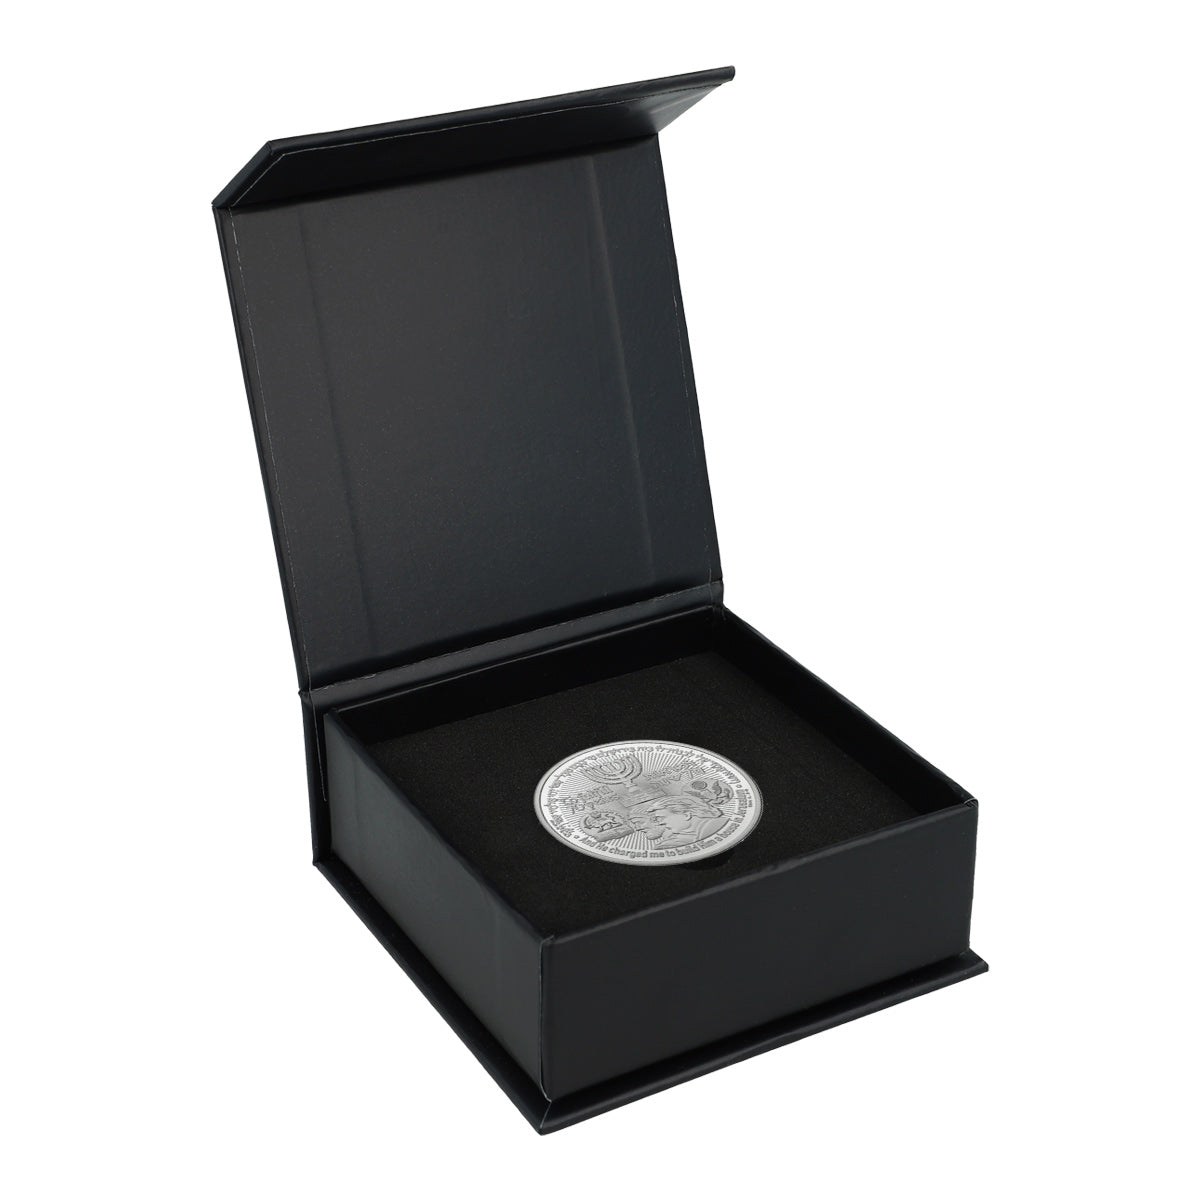 70 Year Coin solid silver with box (6106101022870)